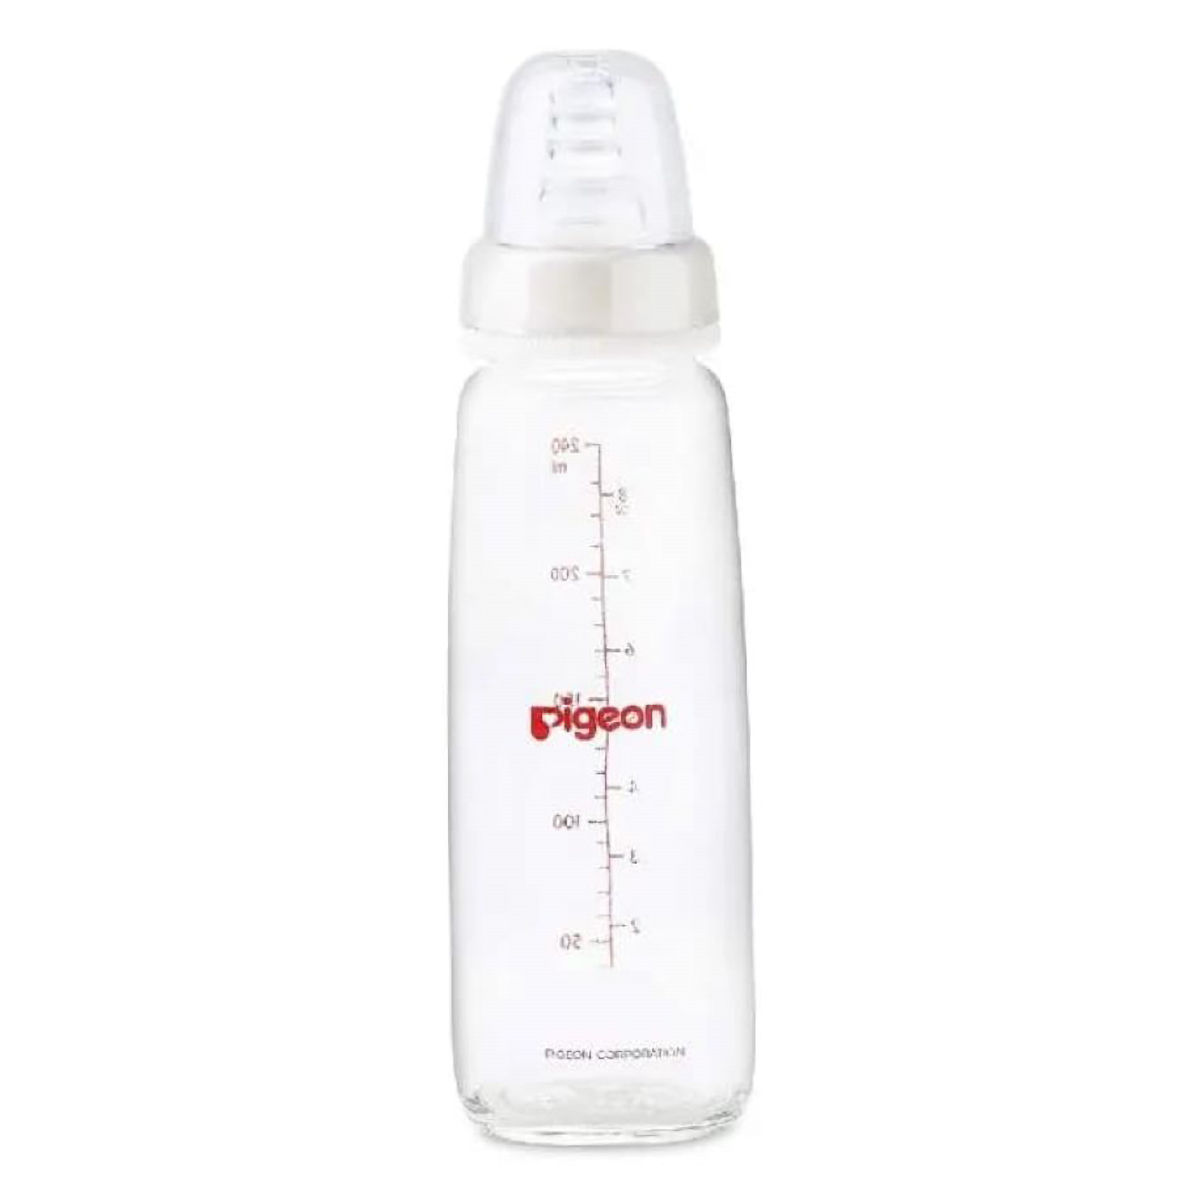 Pigeon Glass Bottle, 240 ml, Pack of 1 